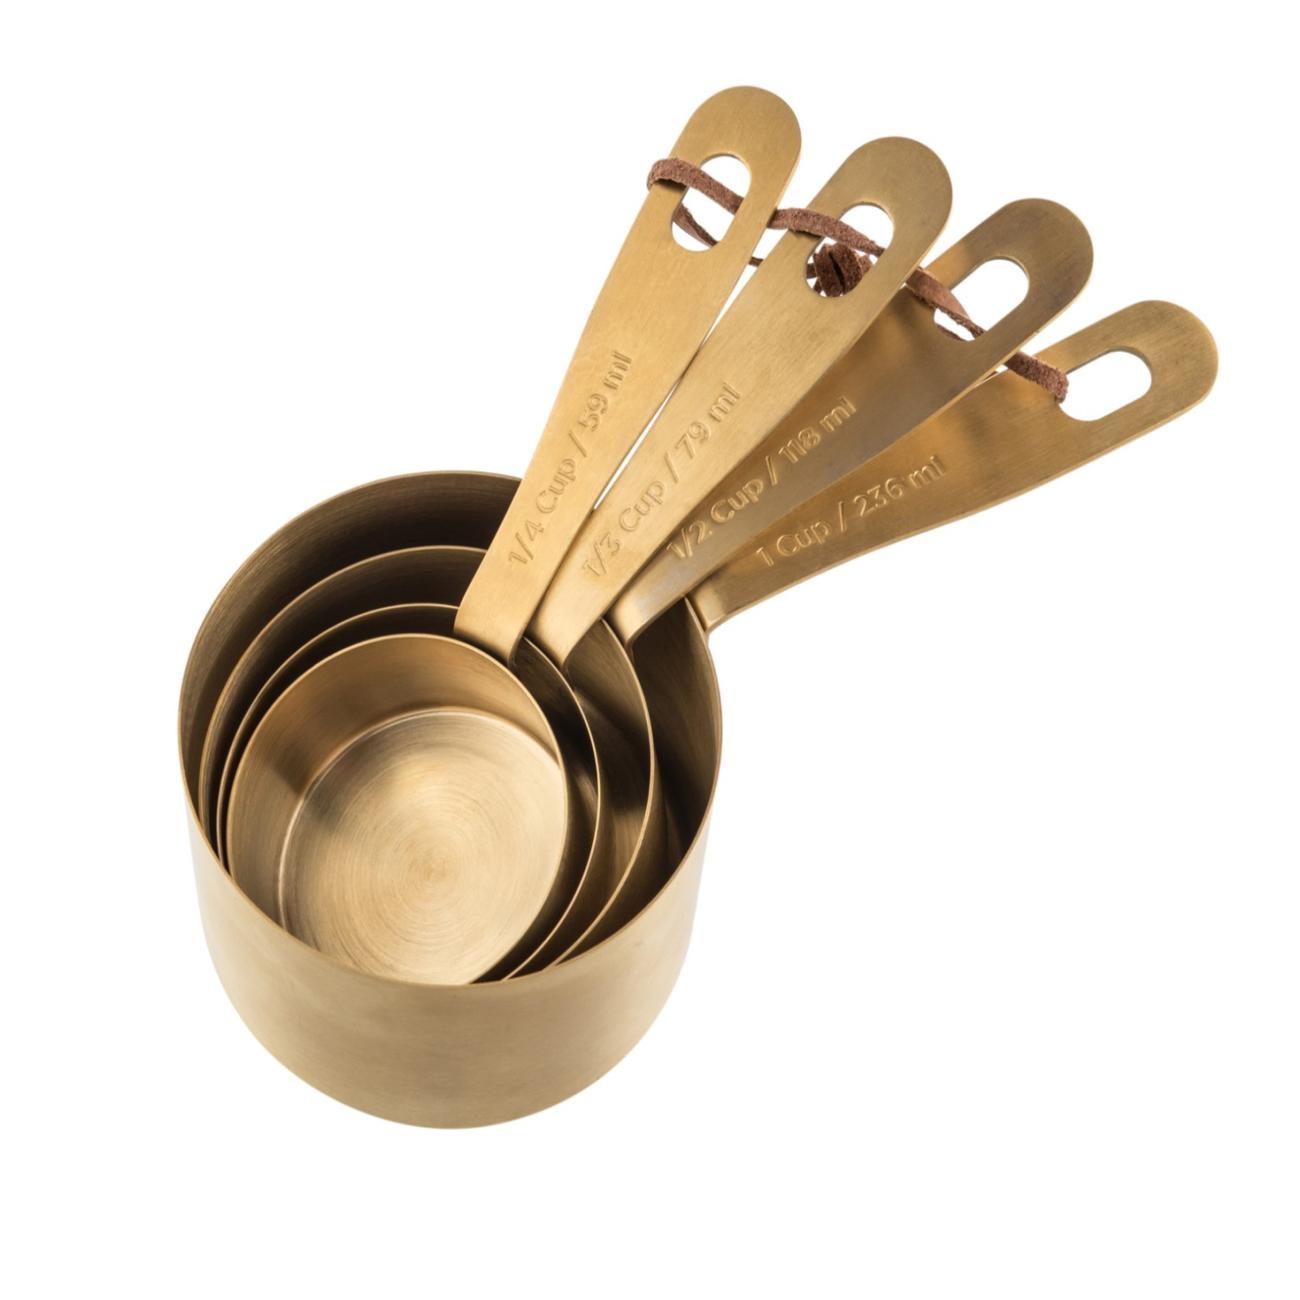 https://www.thekitchenwhisk.ie/contentfiles/productImages/Large/KPMCUP%20-%20Brass%20Measuring%20Cups%201.jpg